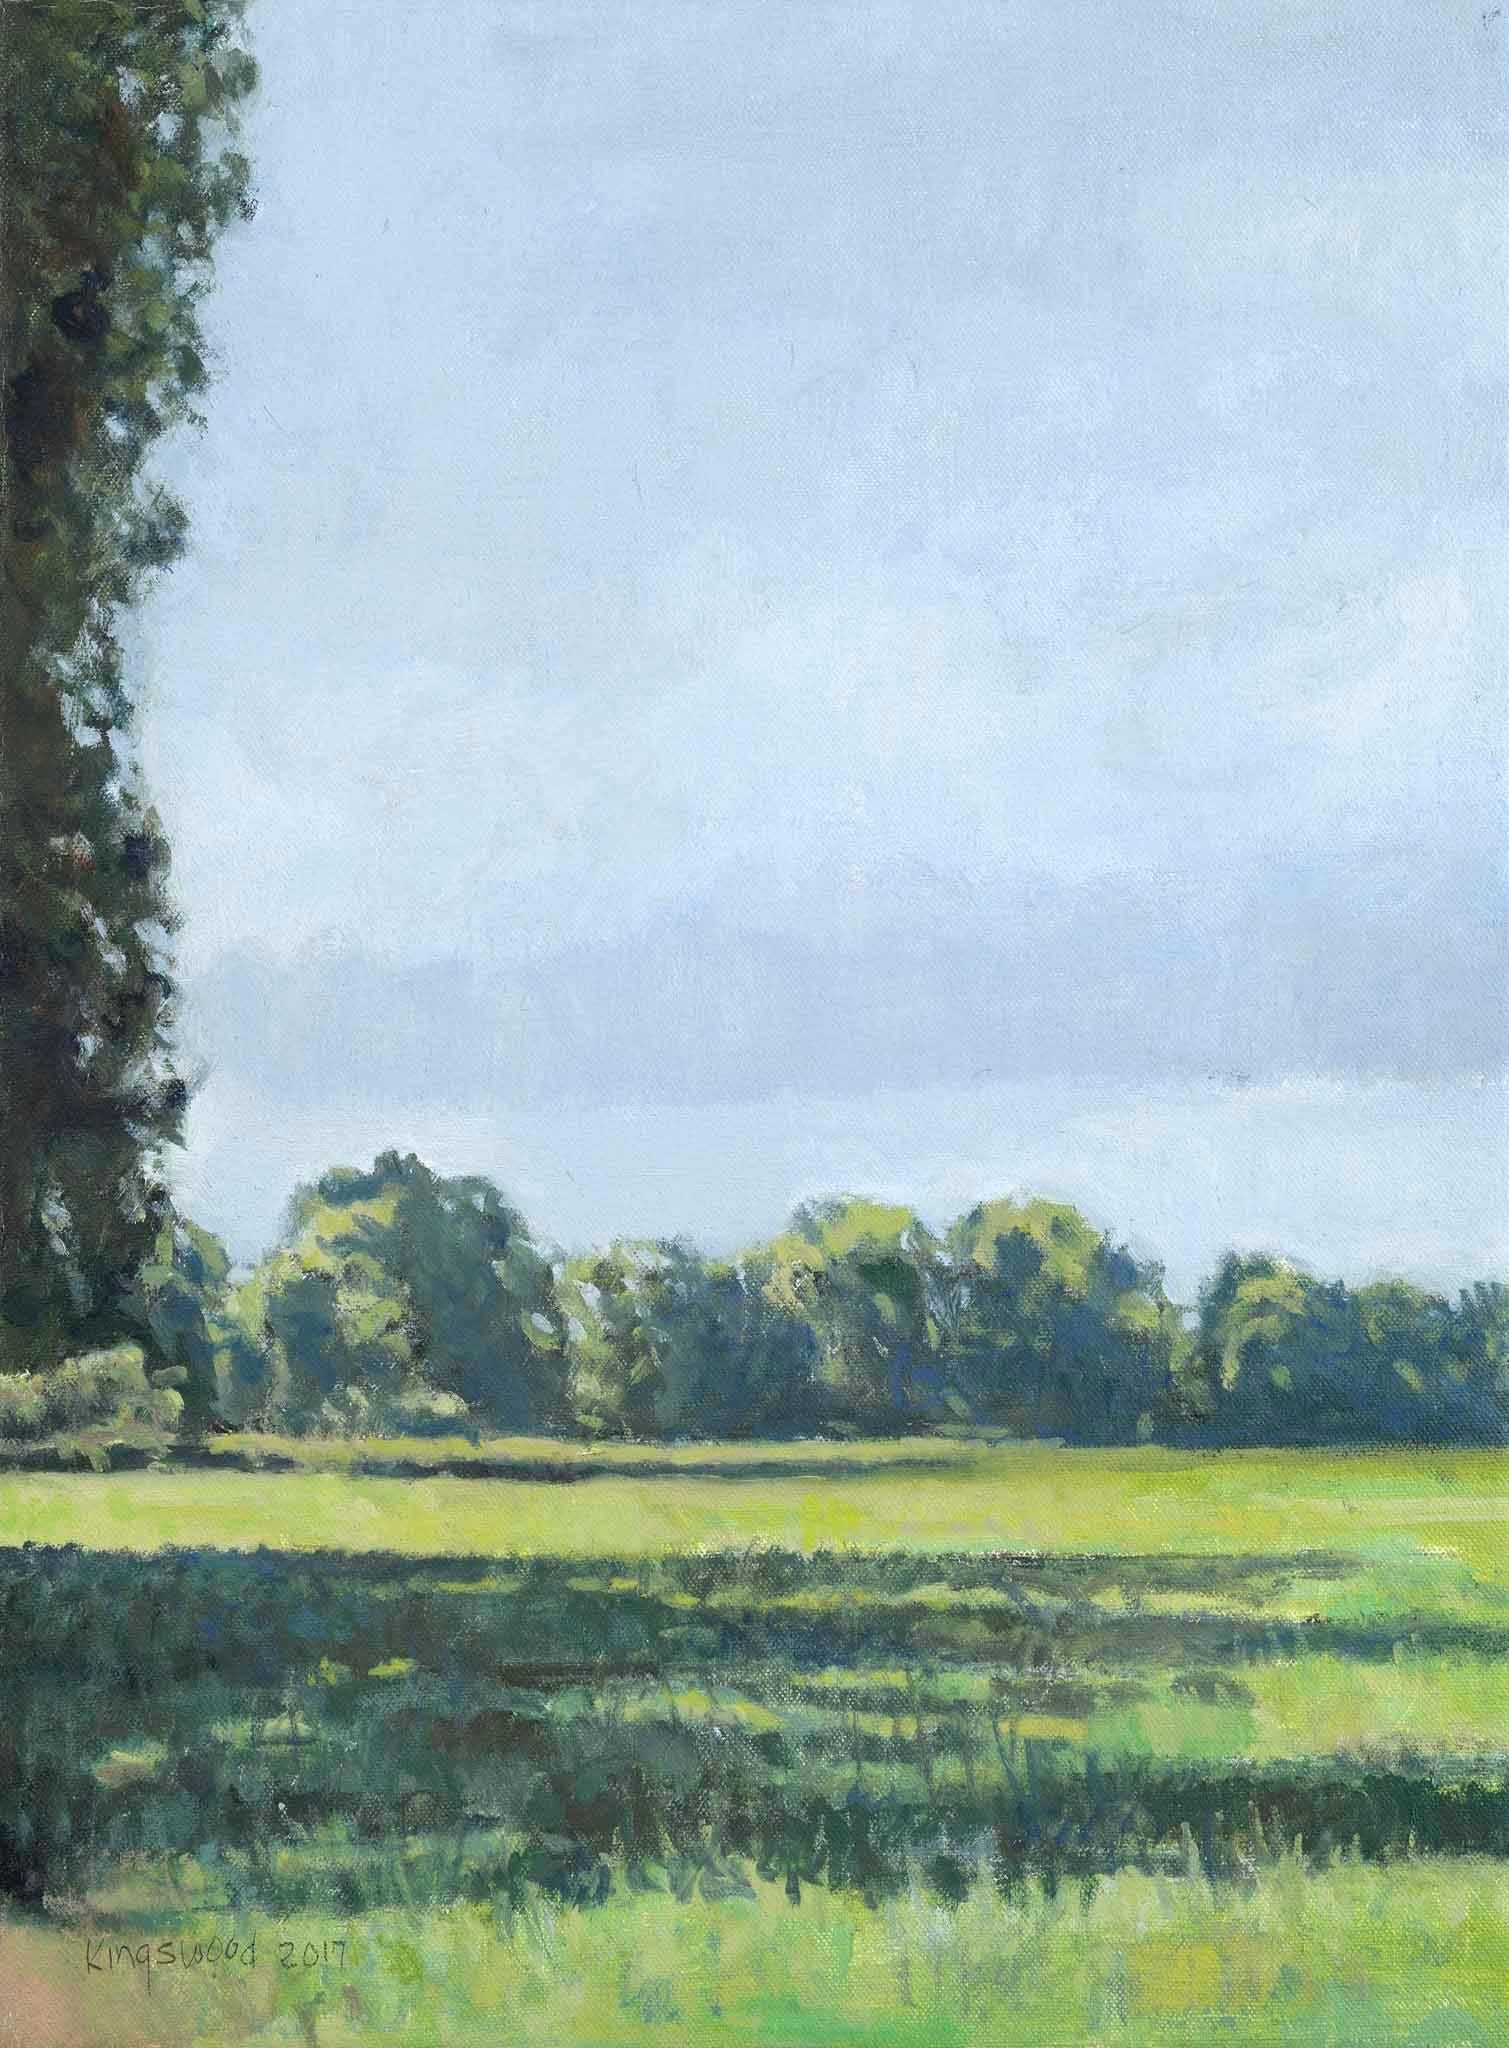 Ron Kingswood Landscape Painting - The Pasture